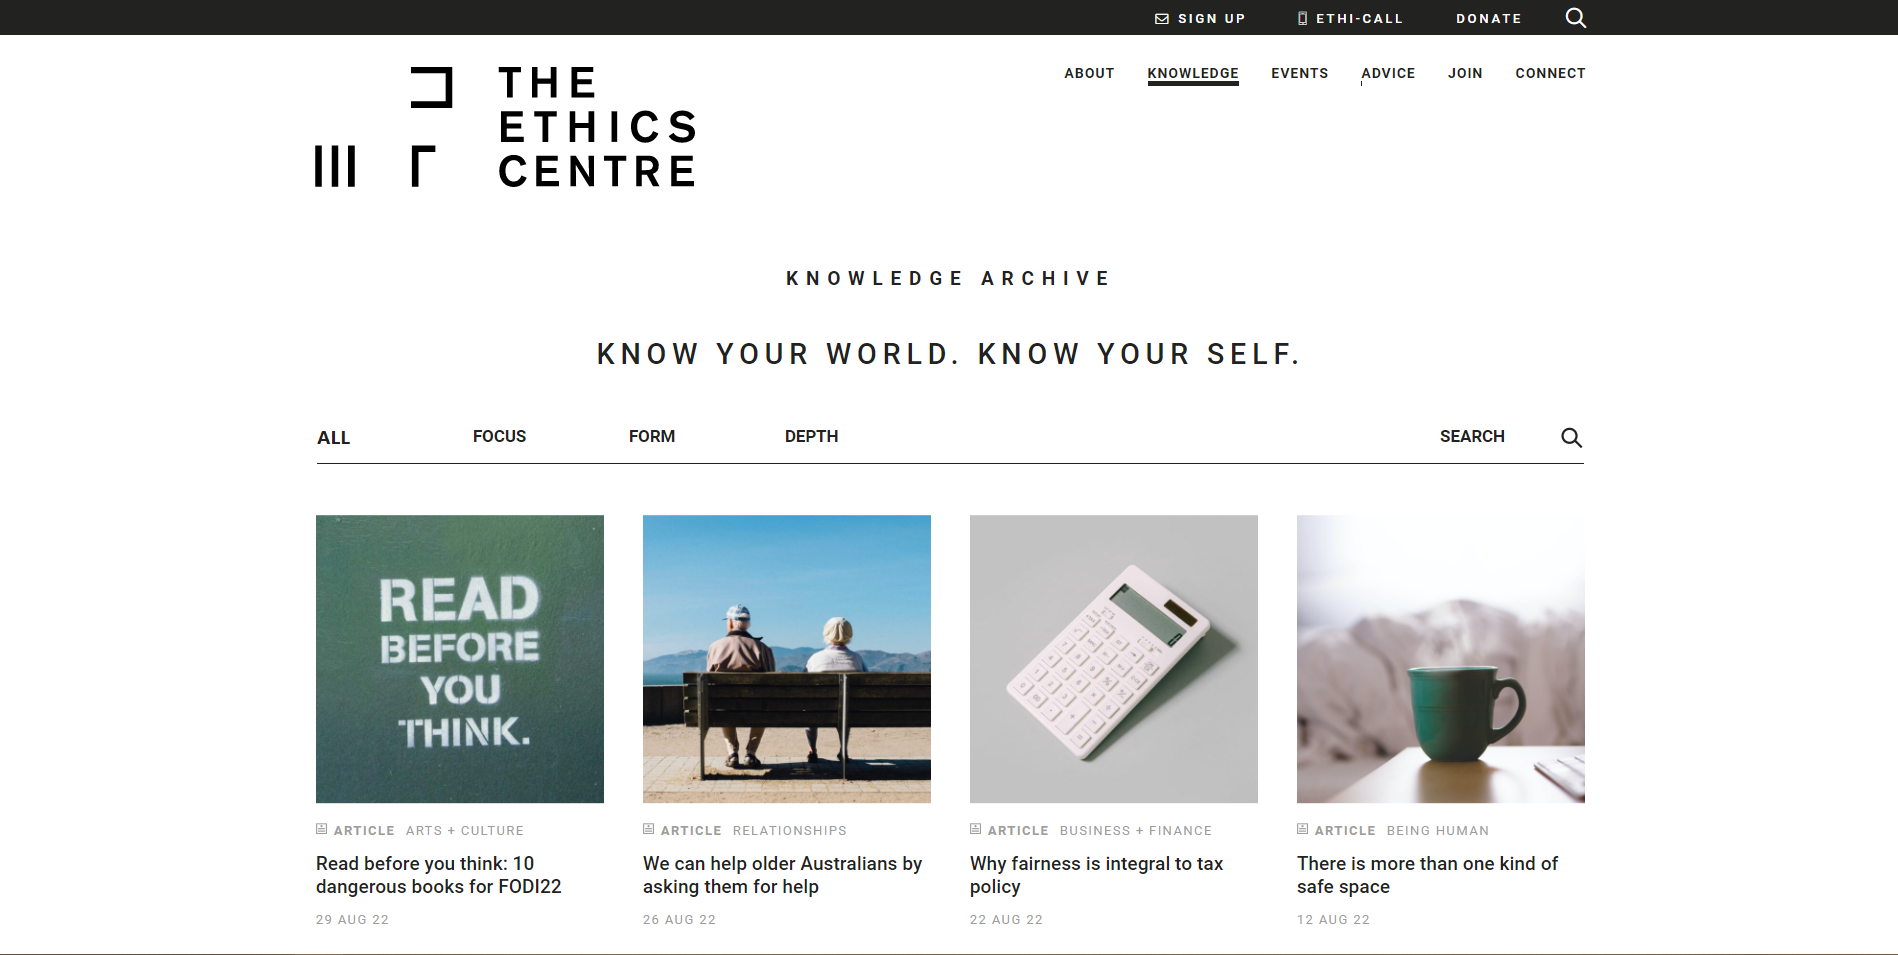 The Ethics Centre: Knowledge Archive